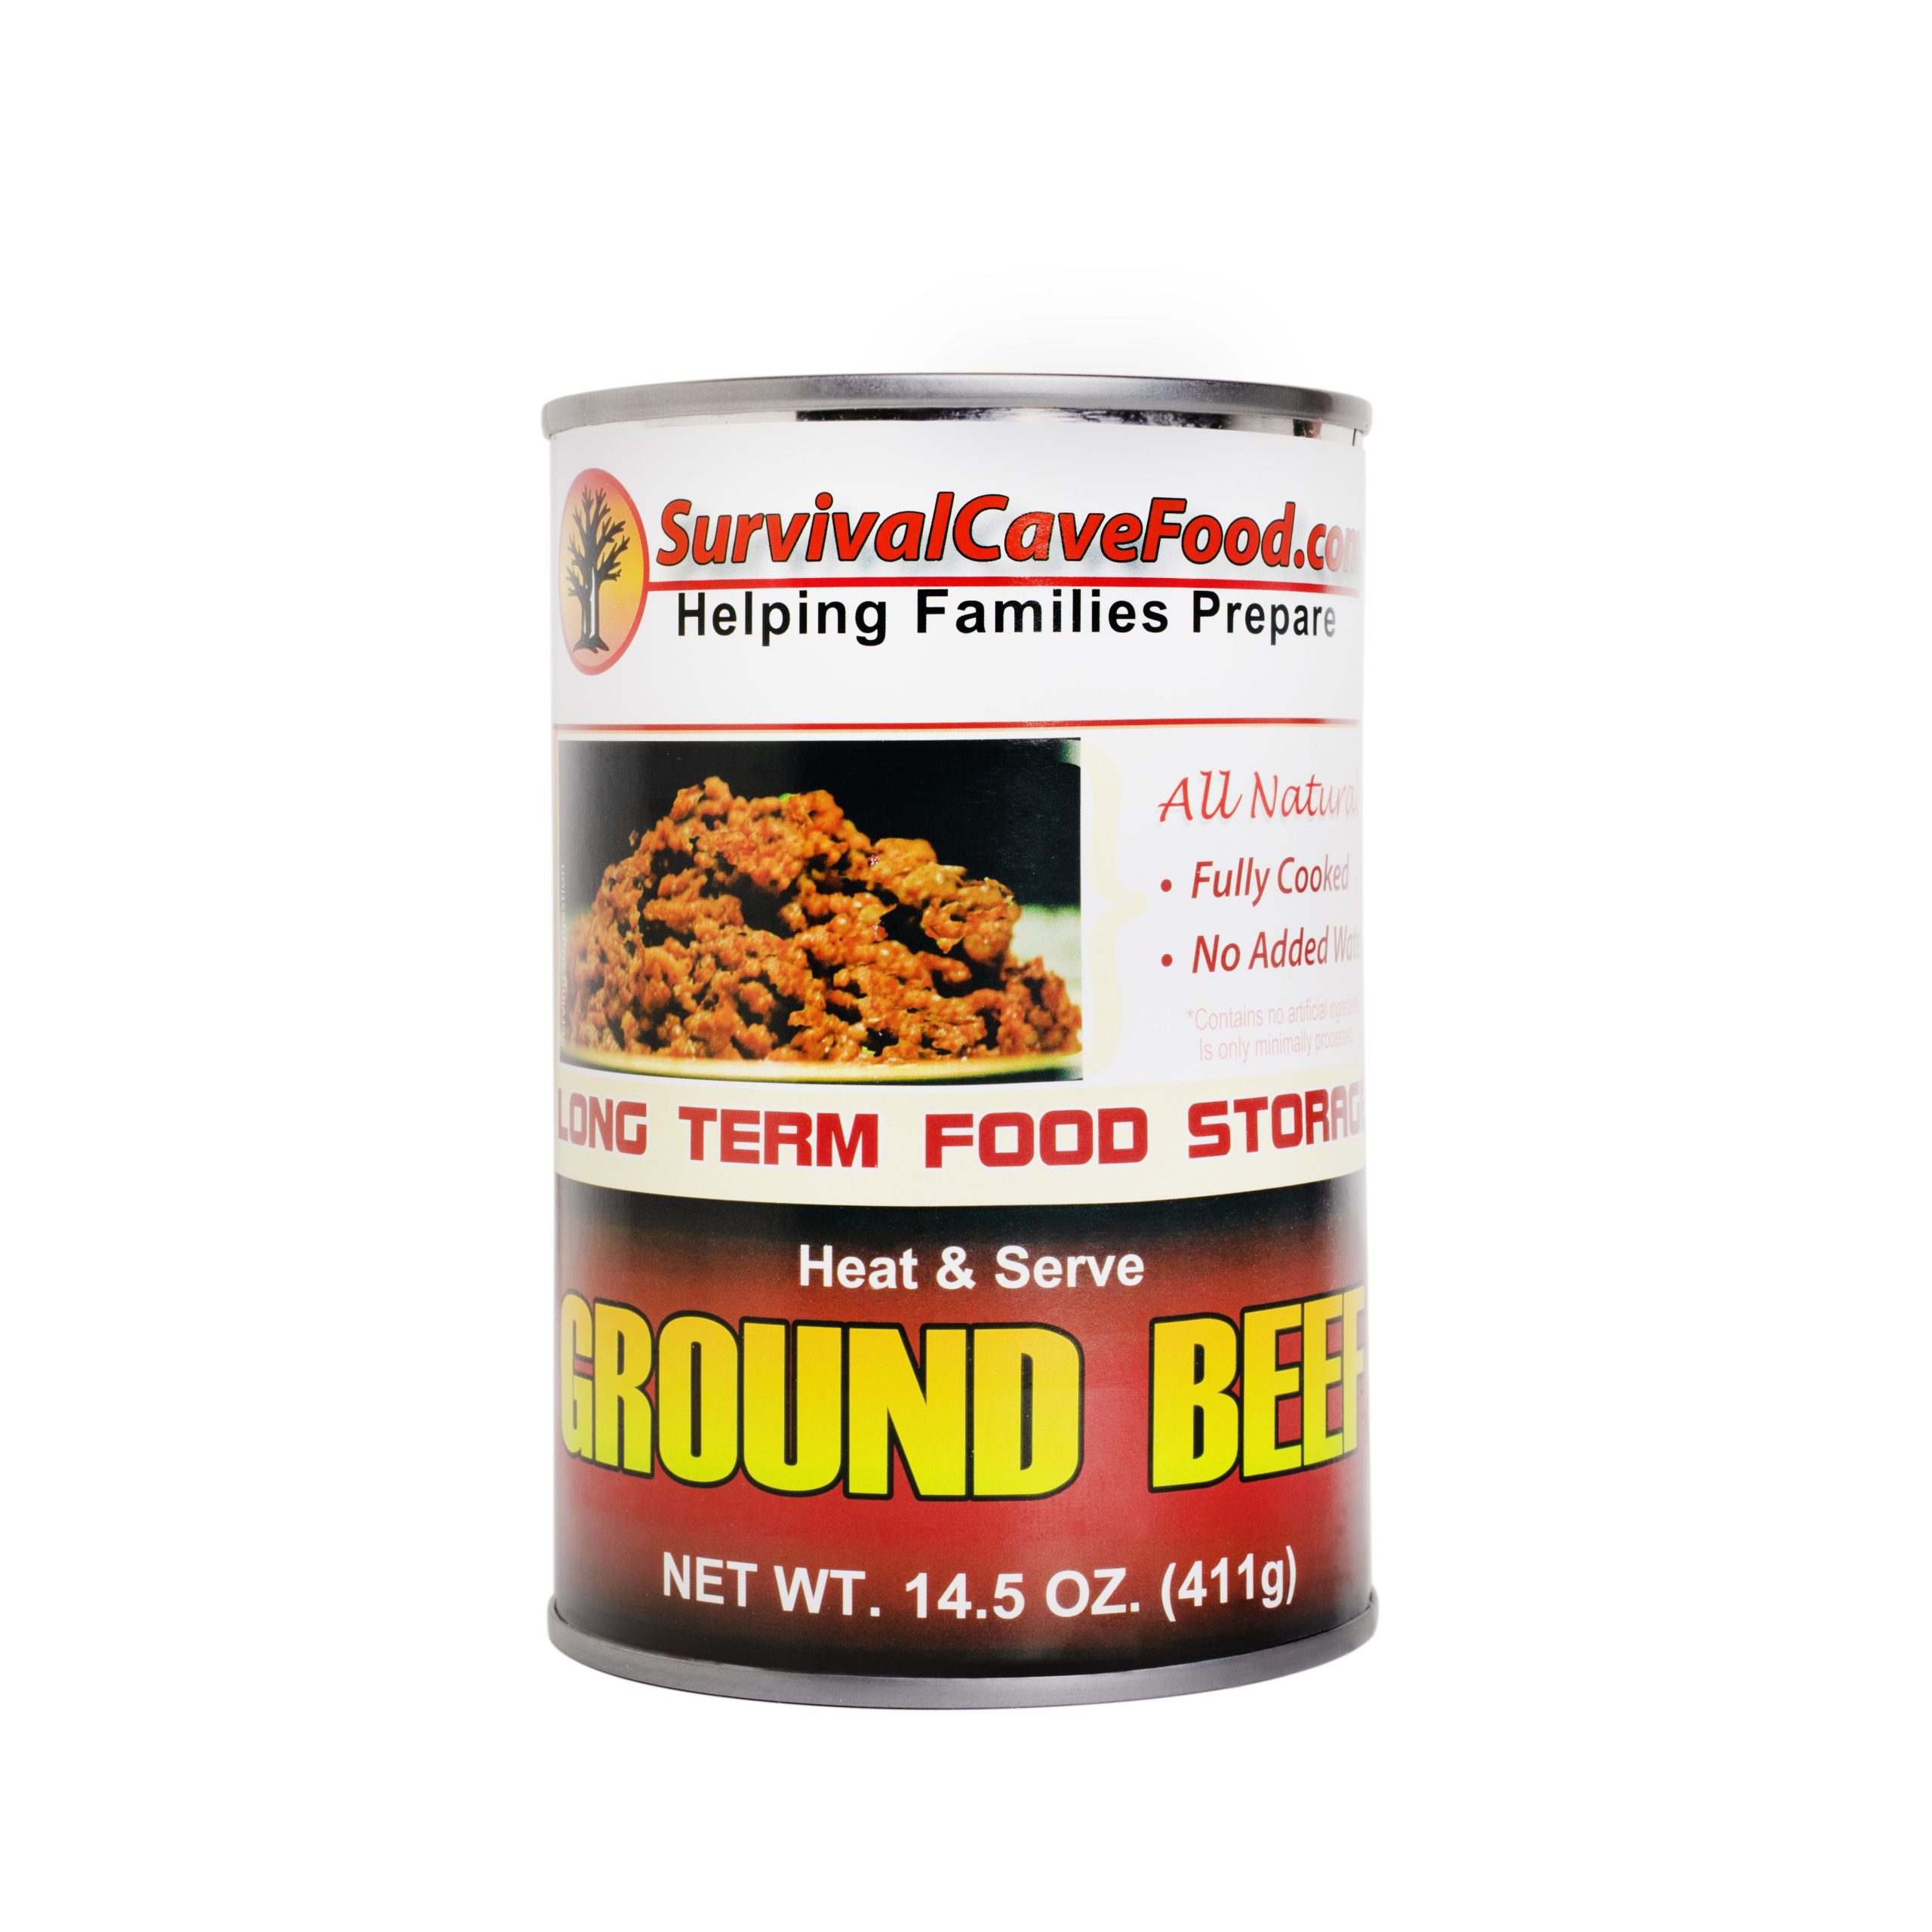 A can of ground beef for emergency food storage on a white background.